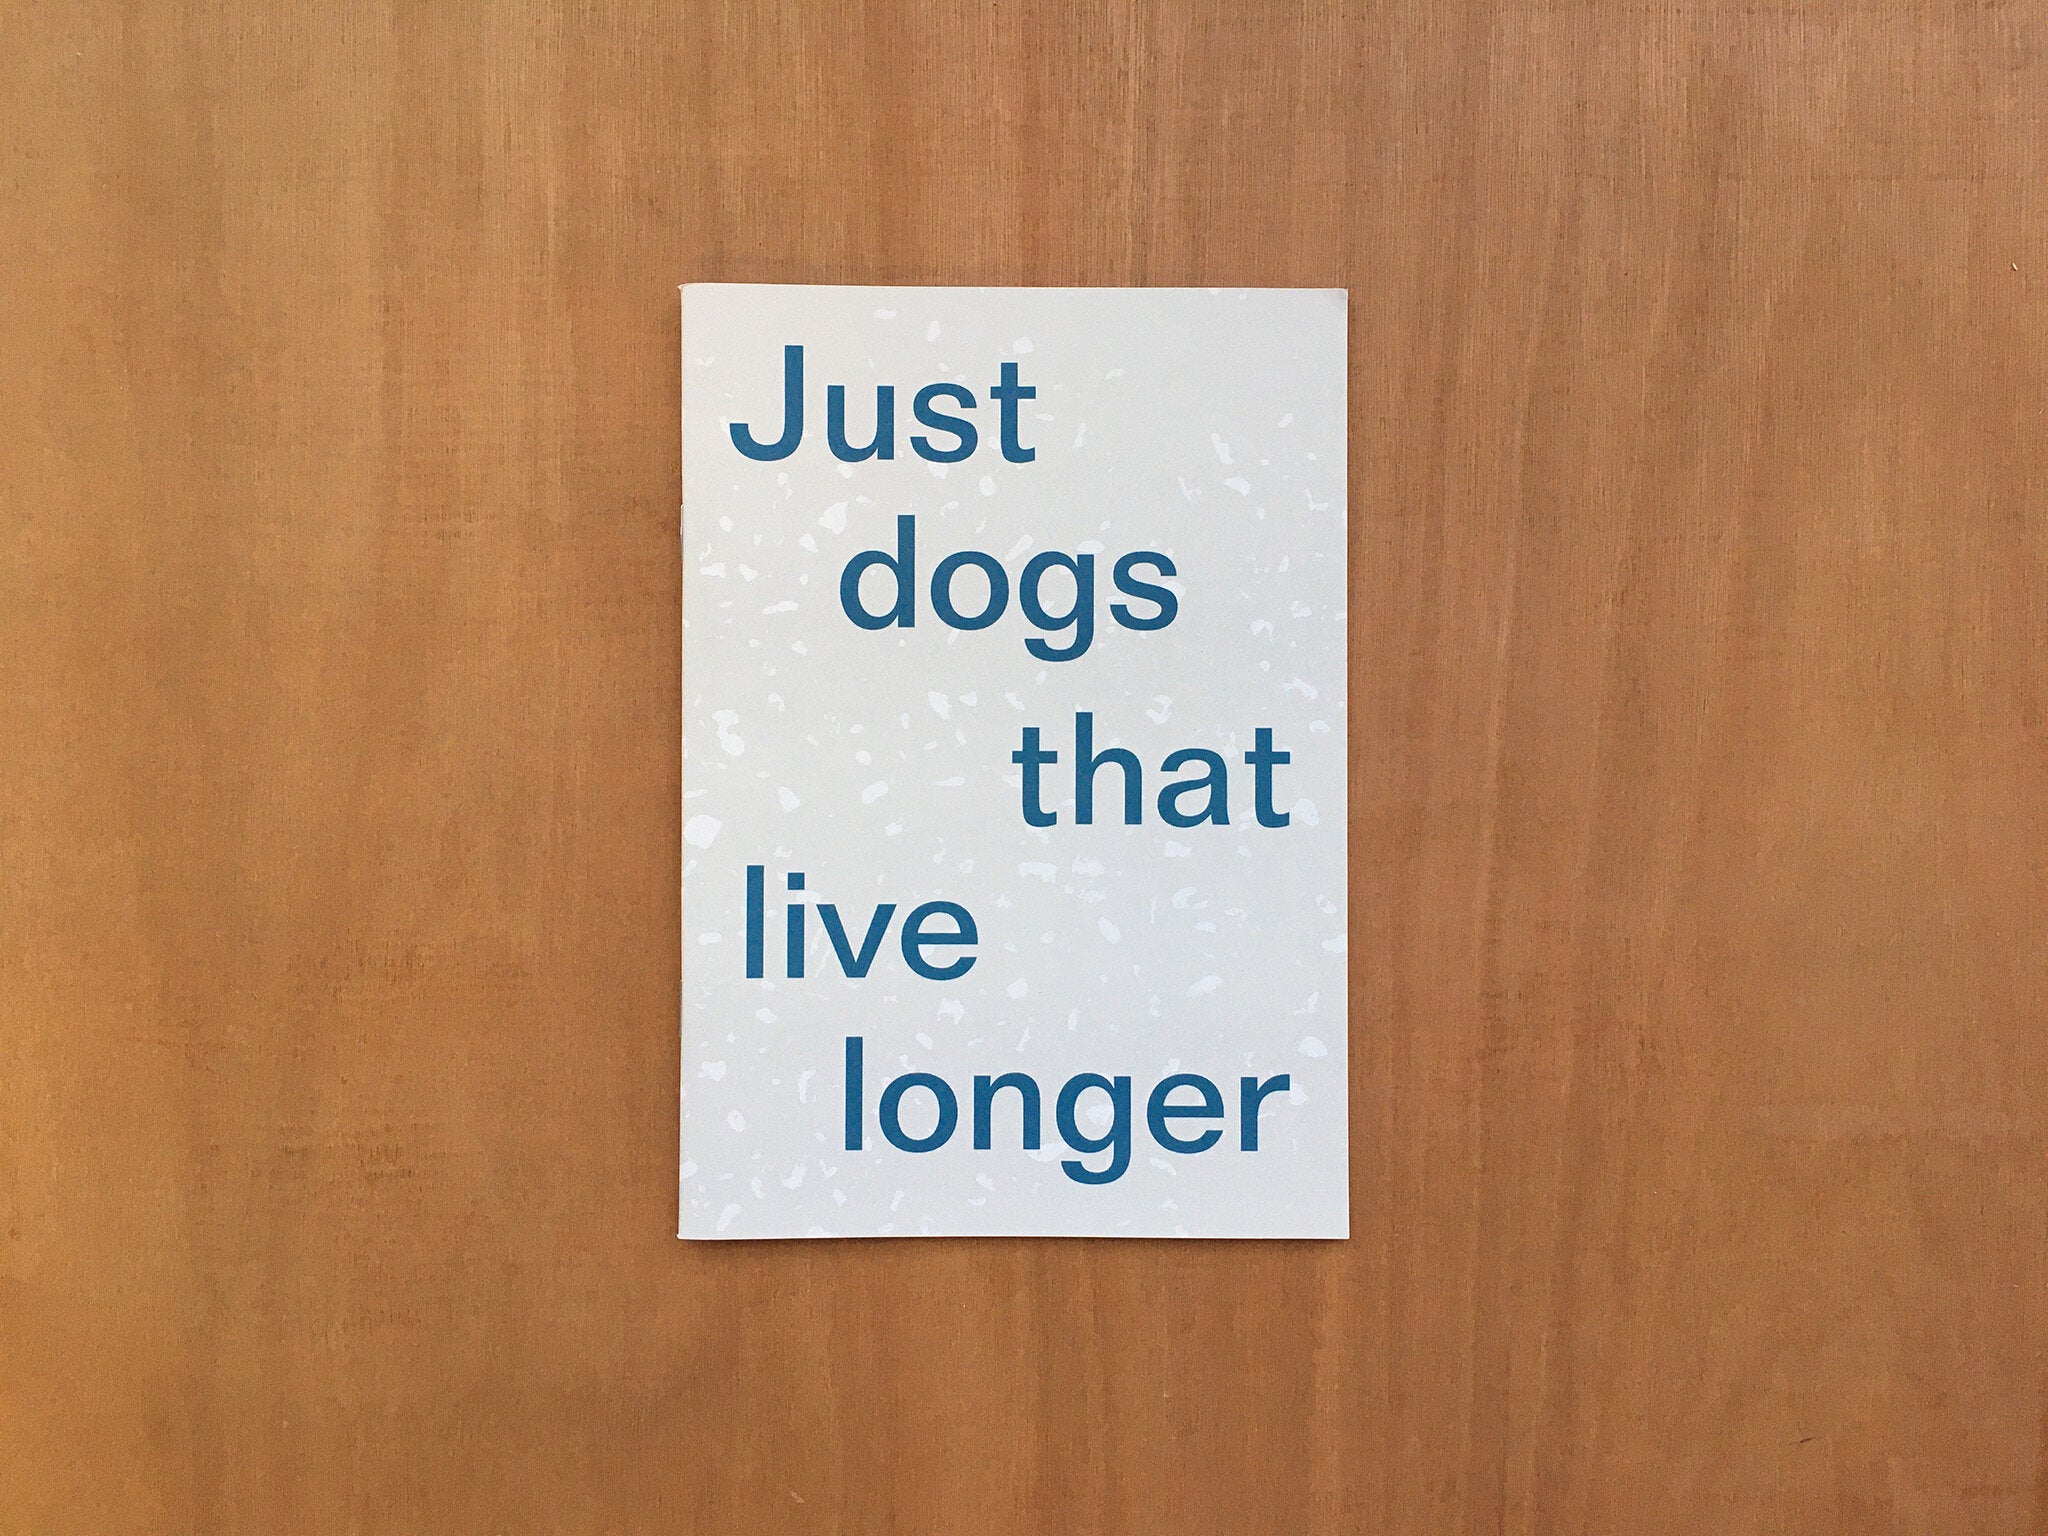 JUST DOGS THAT LIVE LONGER by Stephen Forge